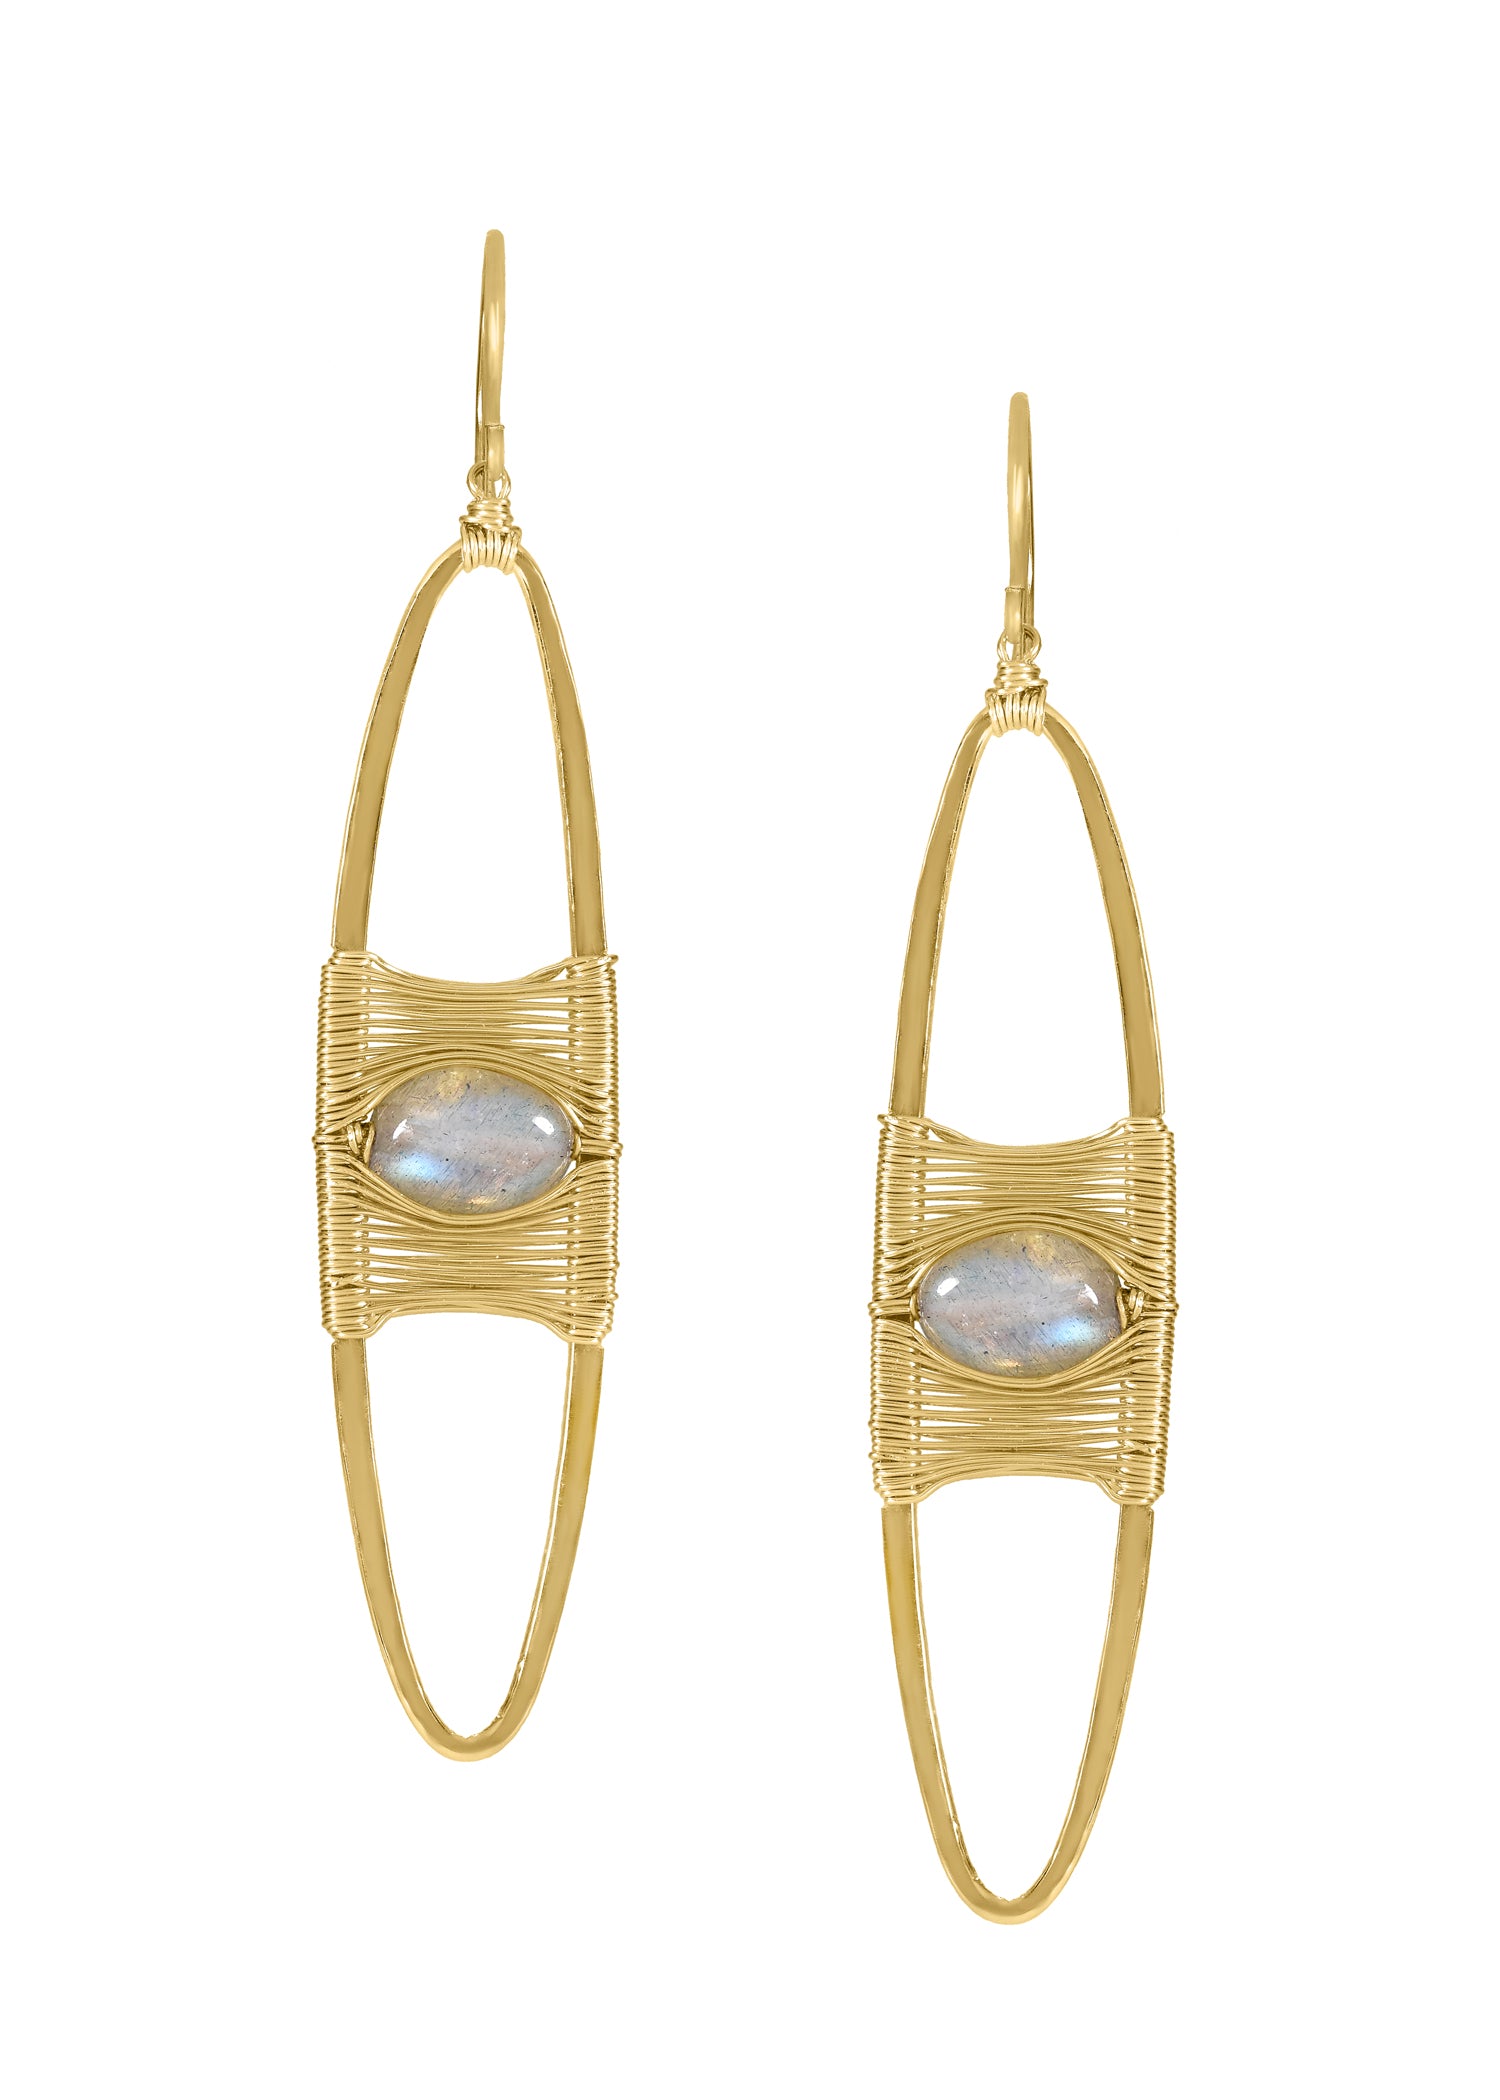 Labradorite 14k gold fill Earrings measure 2-1/2" in length (including the ear wires) and 1/2" in width at the widest point Handmade in our Los Angeles studio